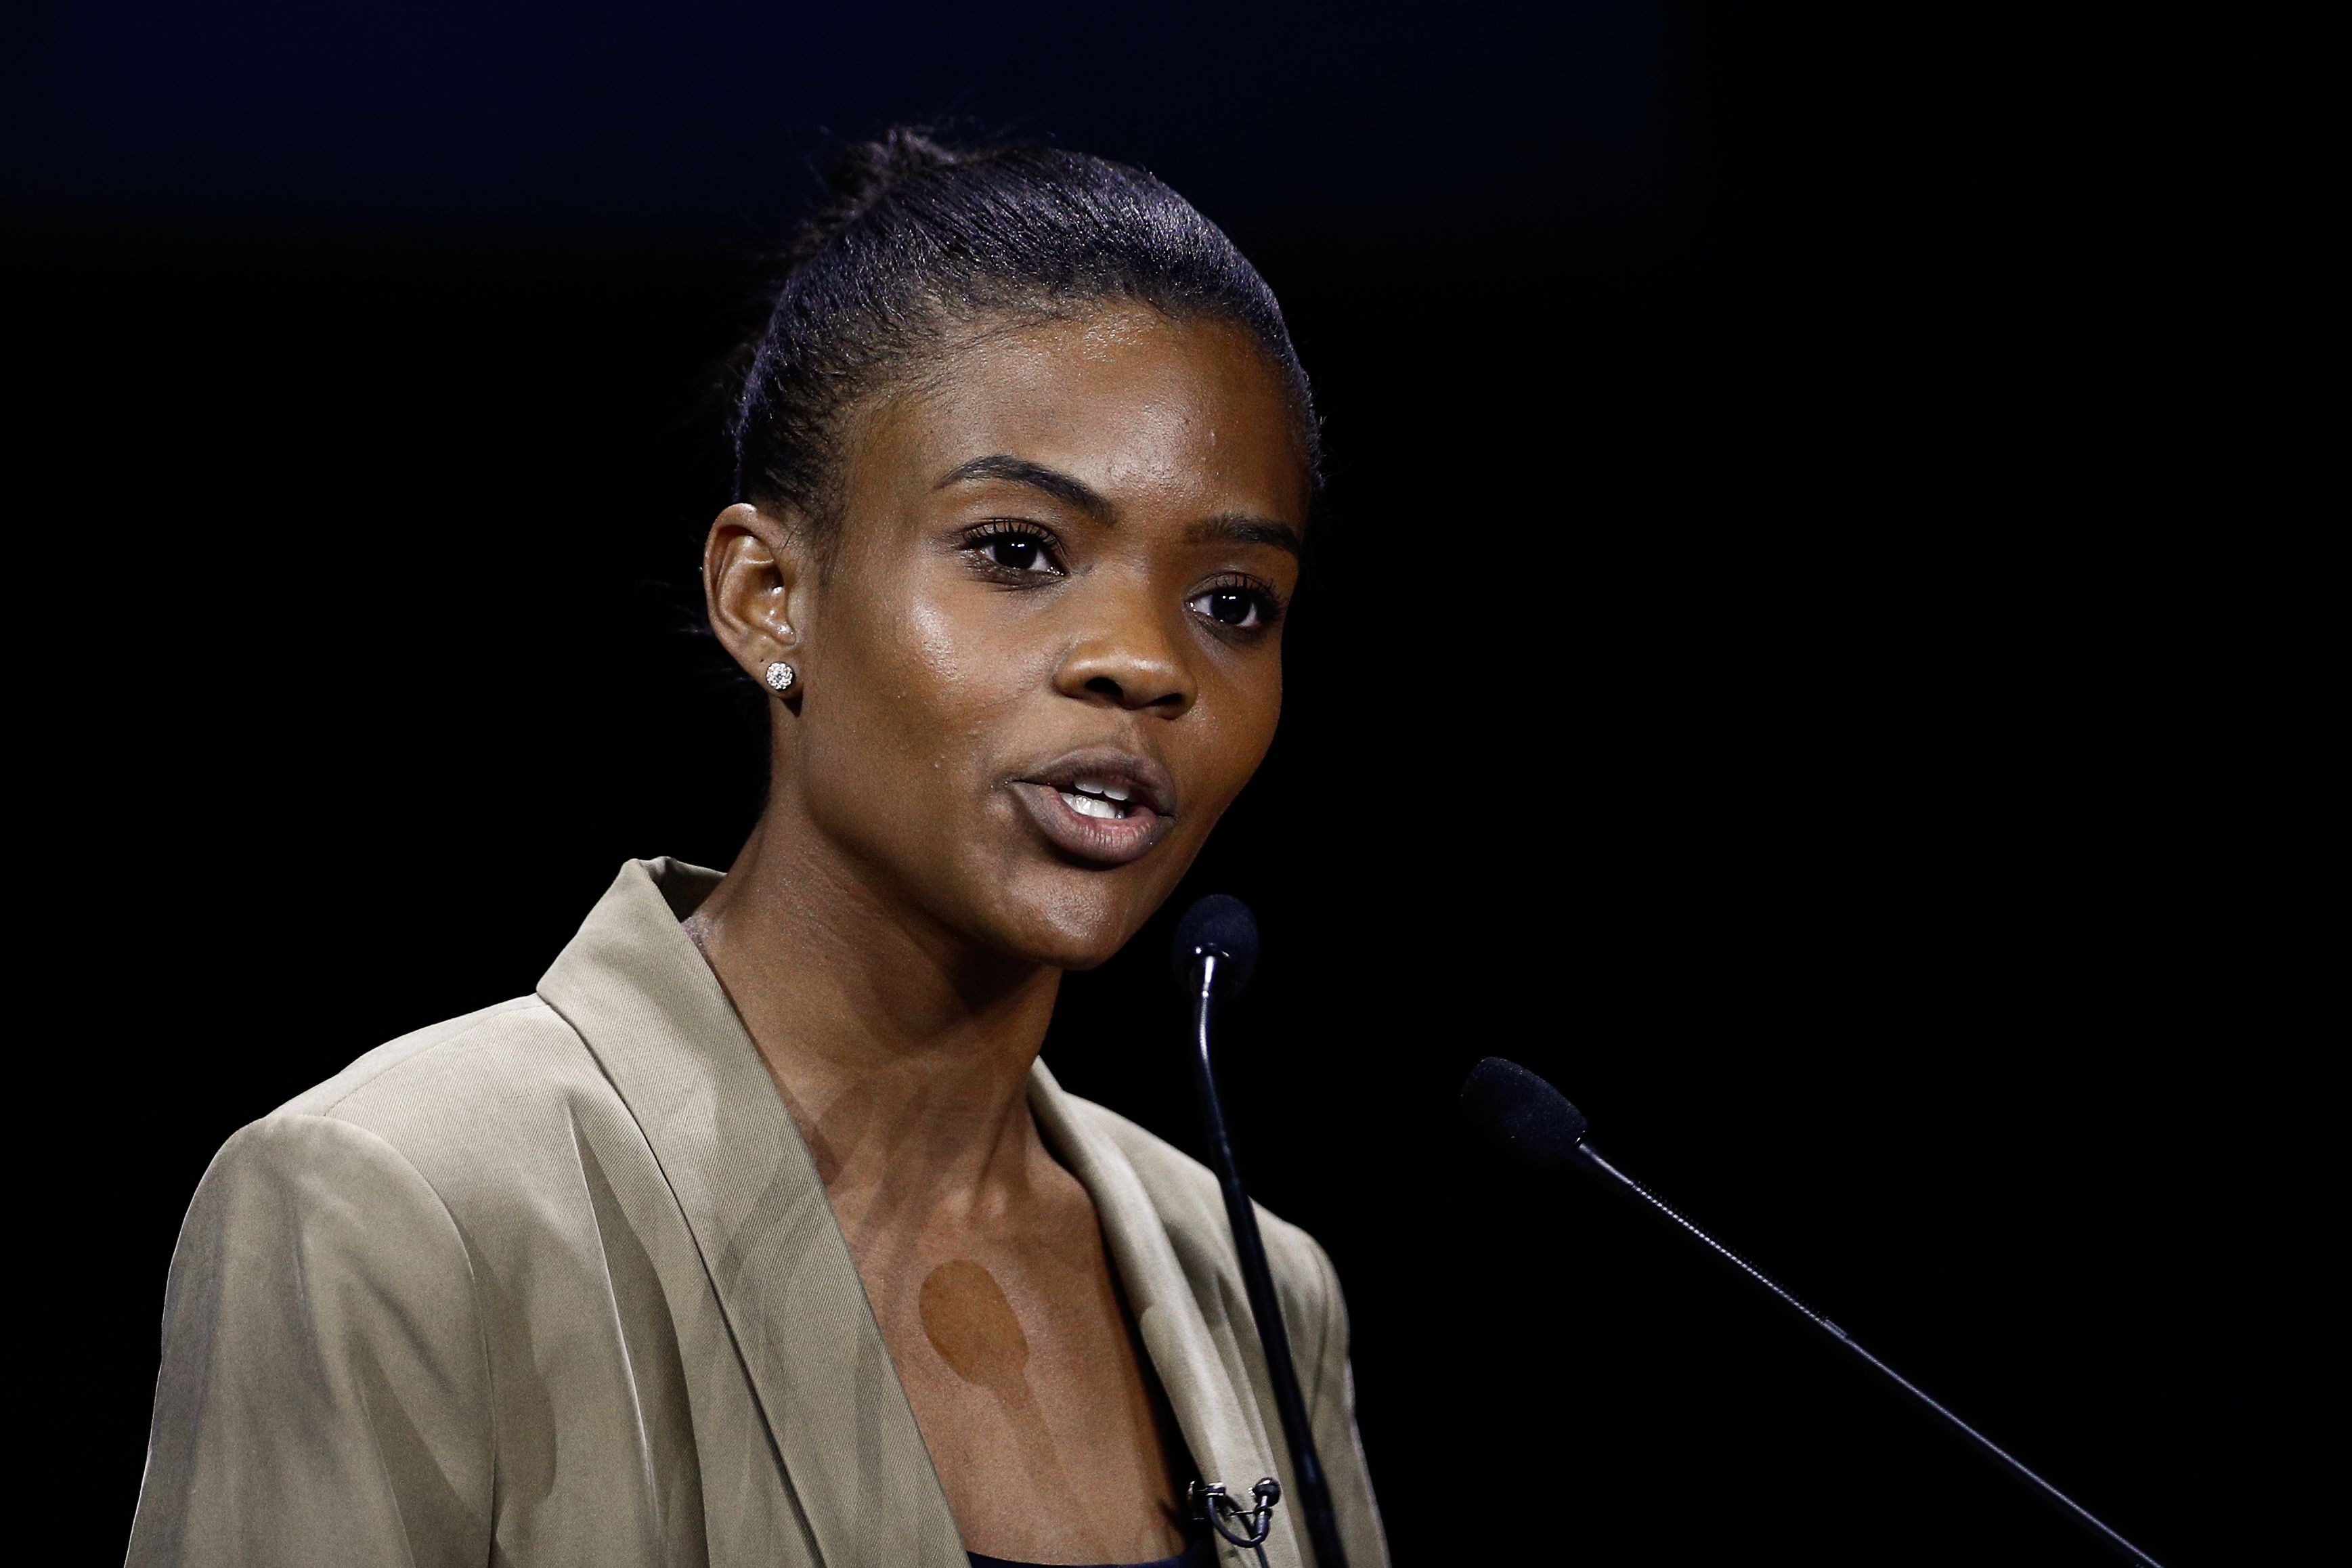 Candace Owens fluffs lines, says she is "on the side of mob rule"...